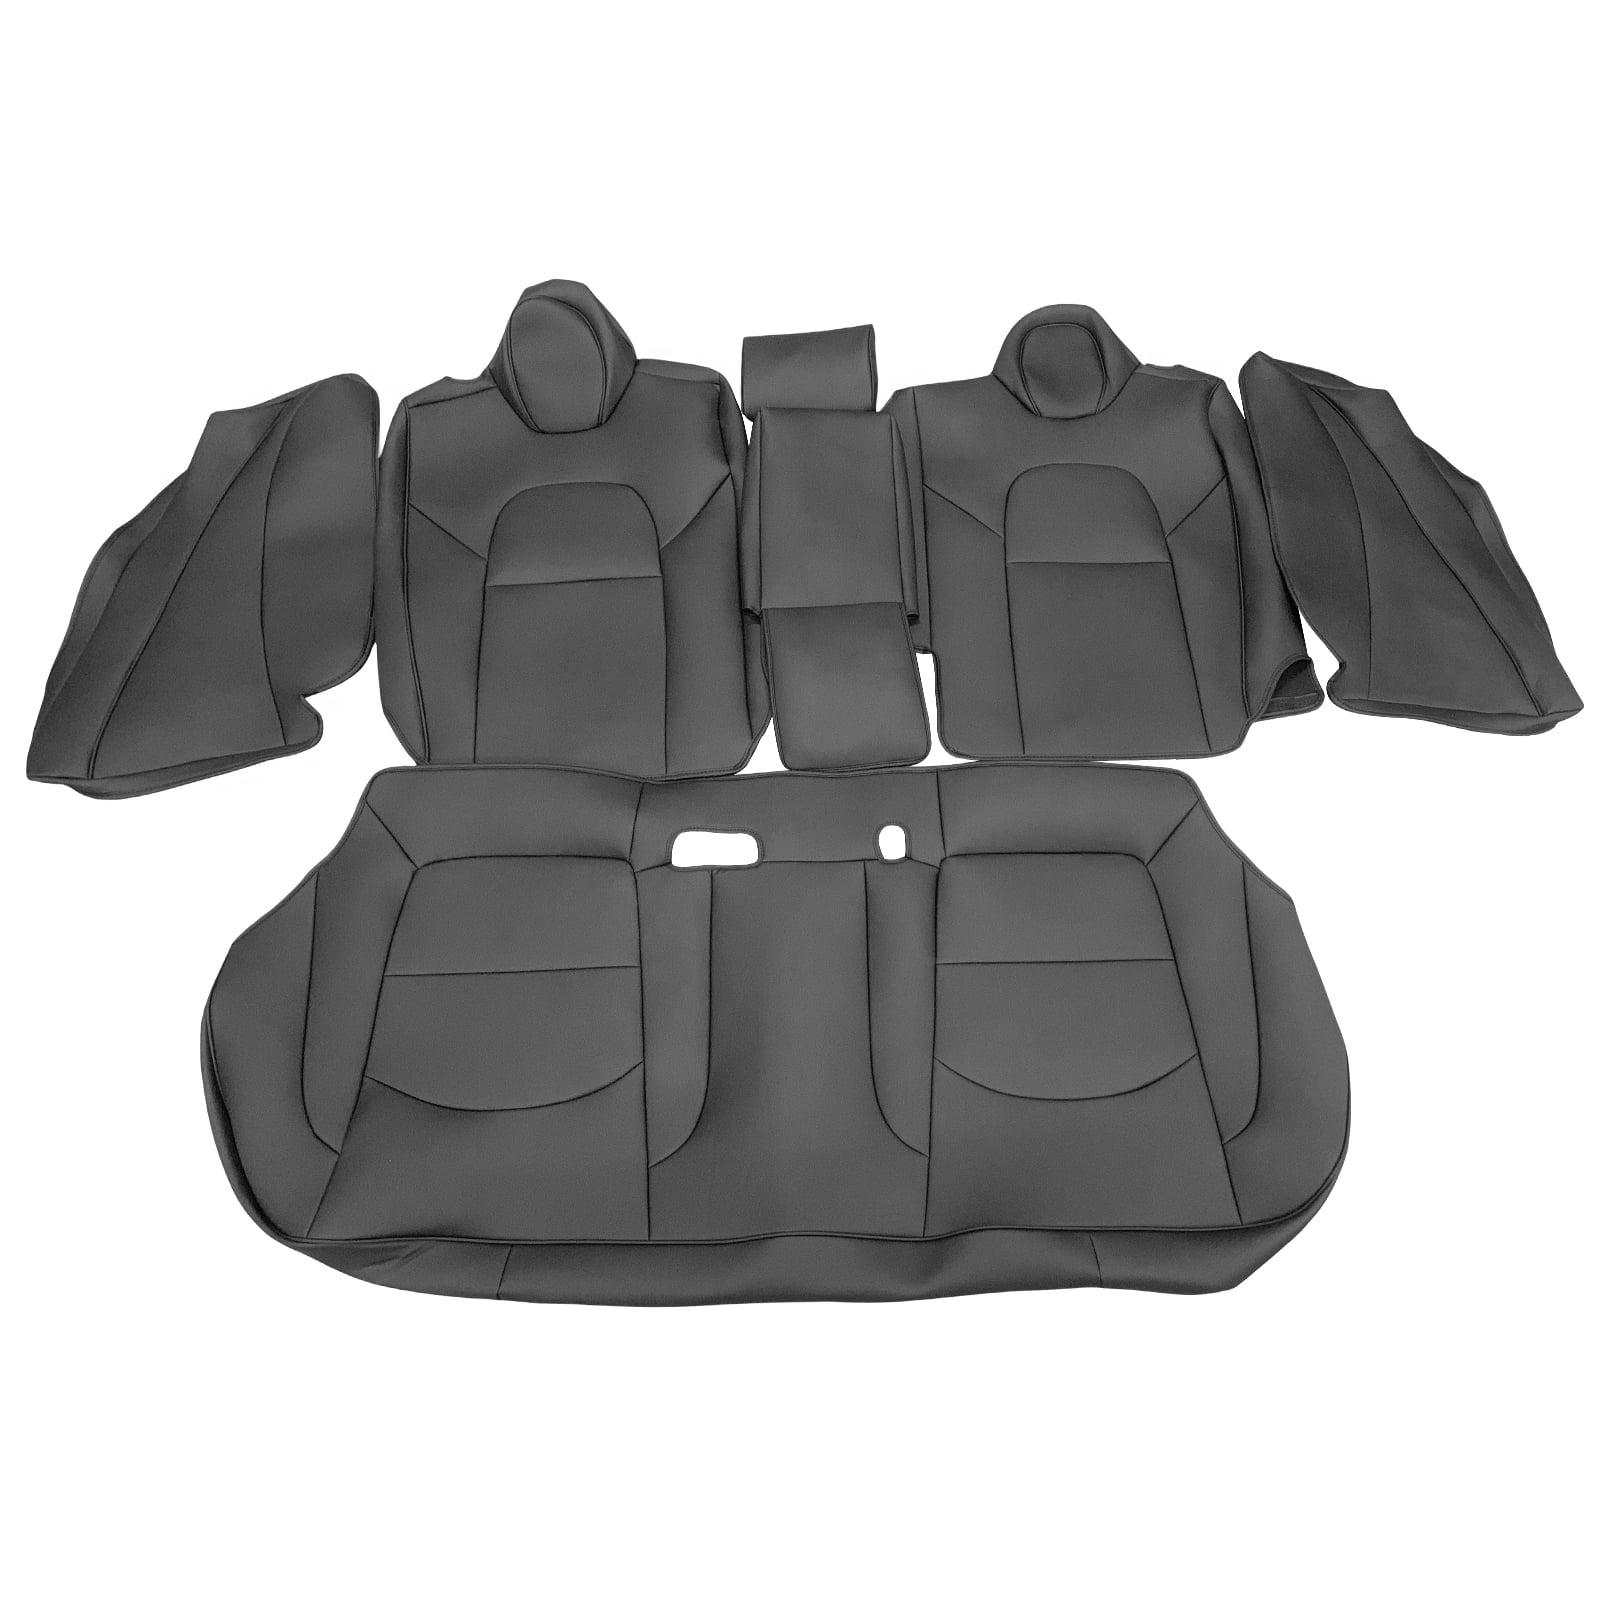 Ikon Motorsports Full Set Car Seat Covers Compatible With 2017